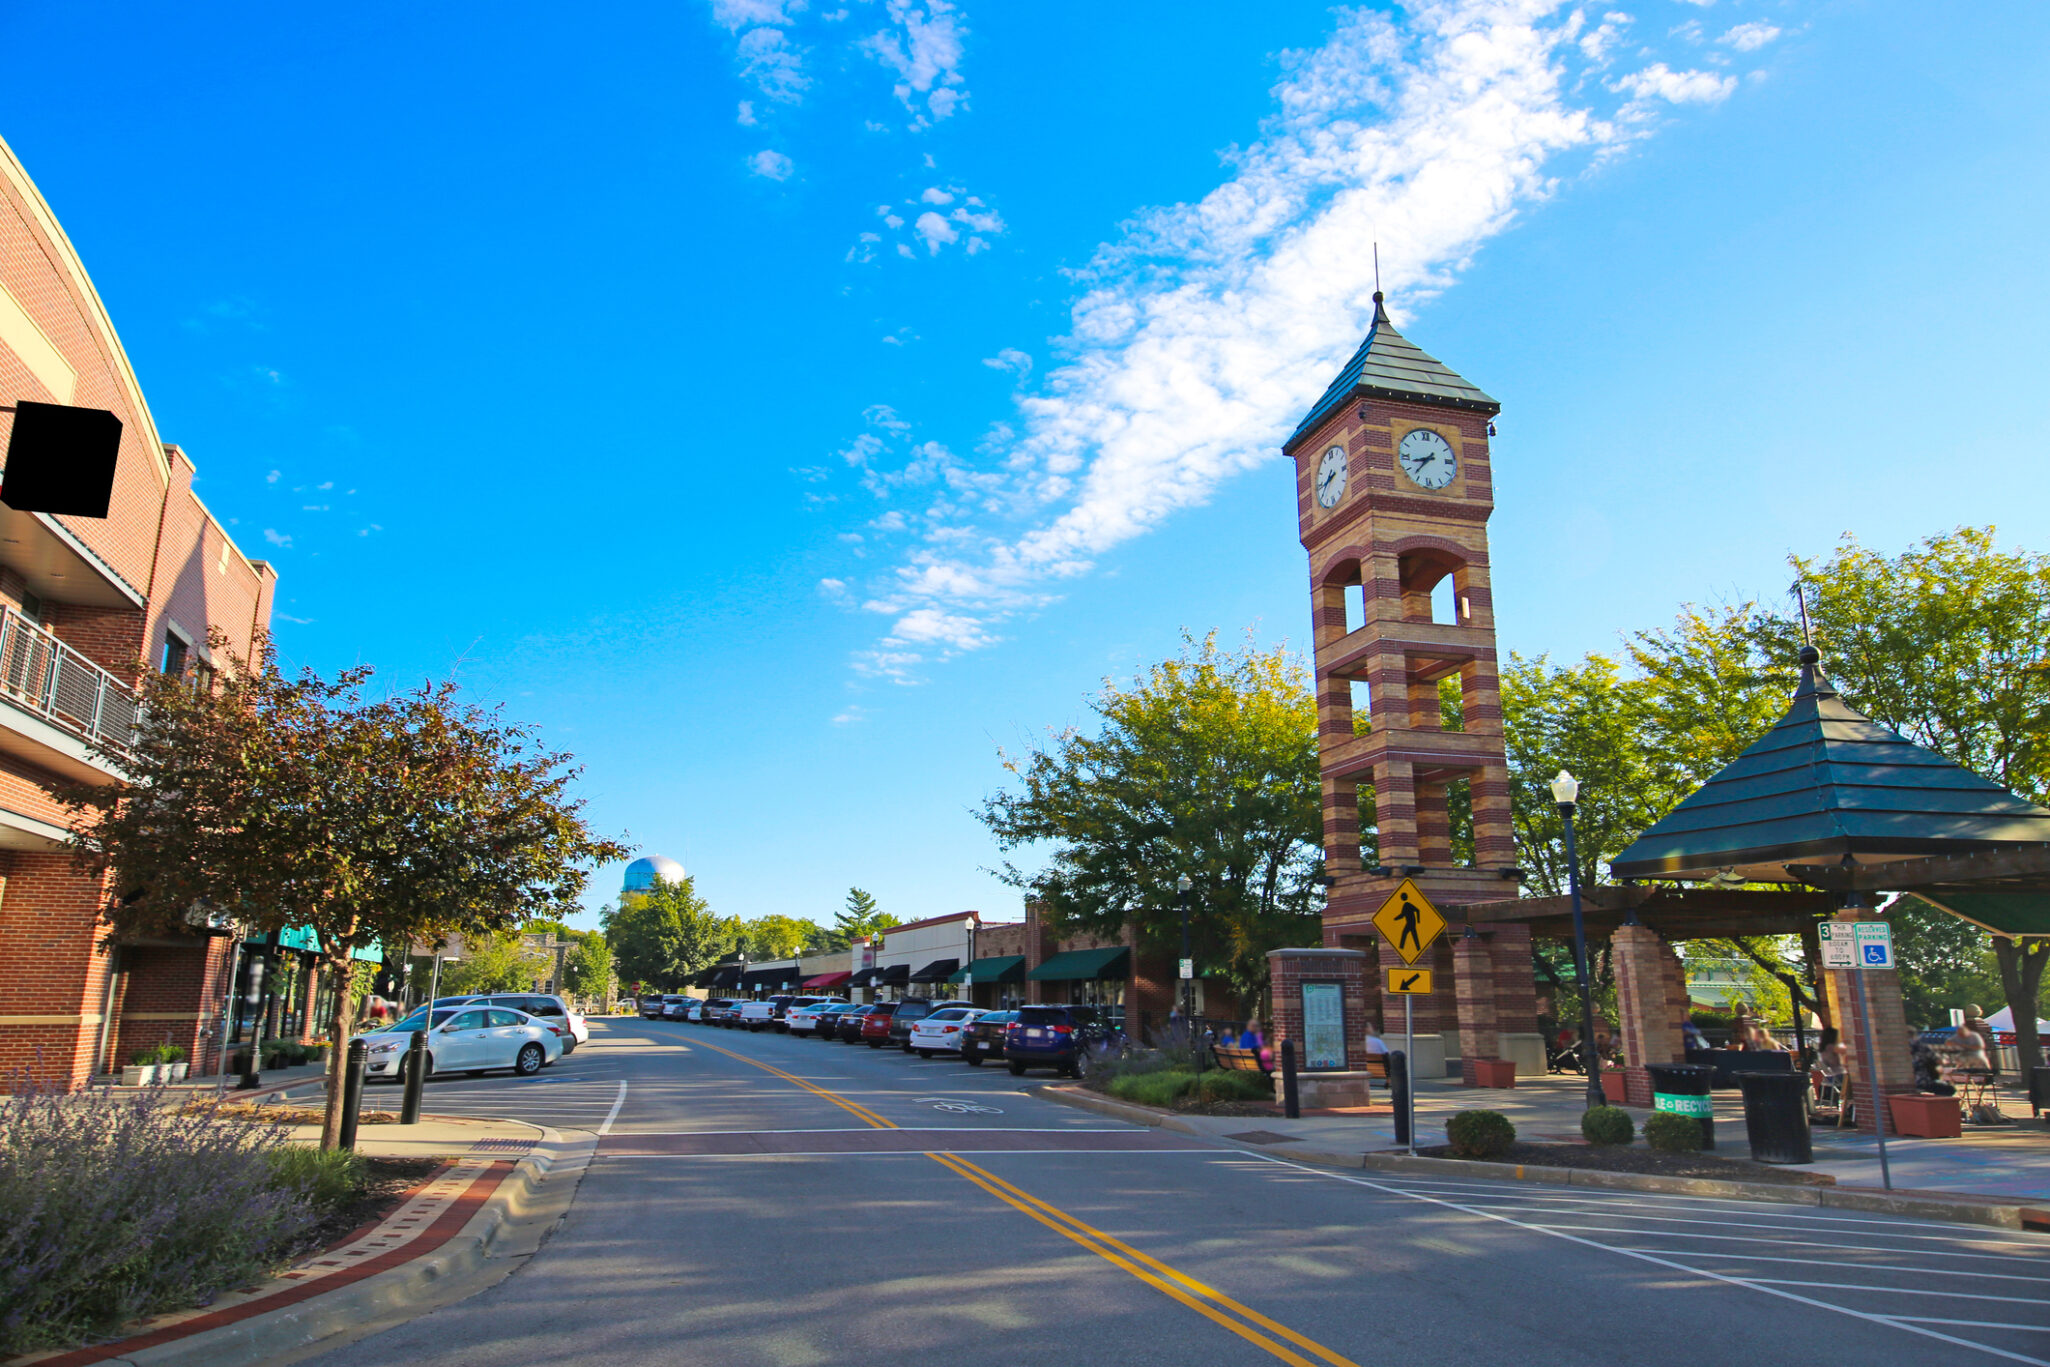 The clock tower in downtown Overland Park, Kansas.